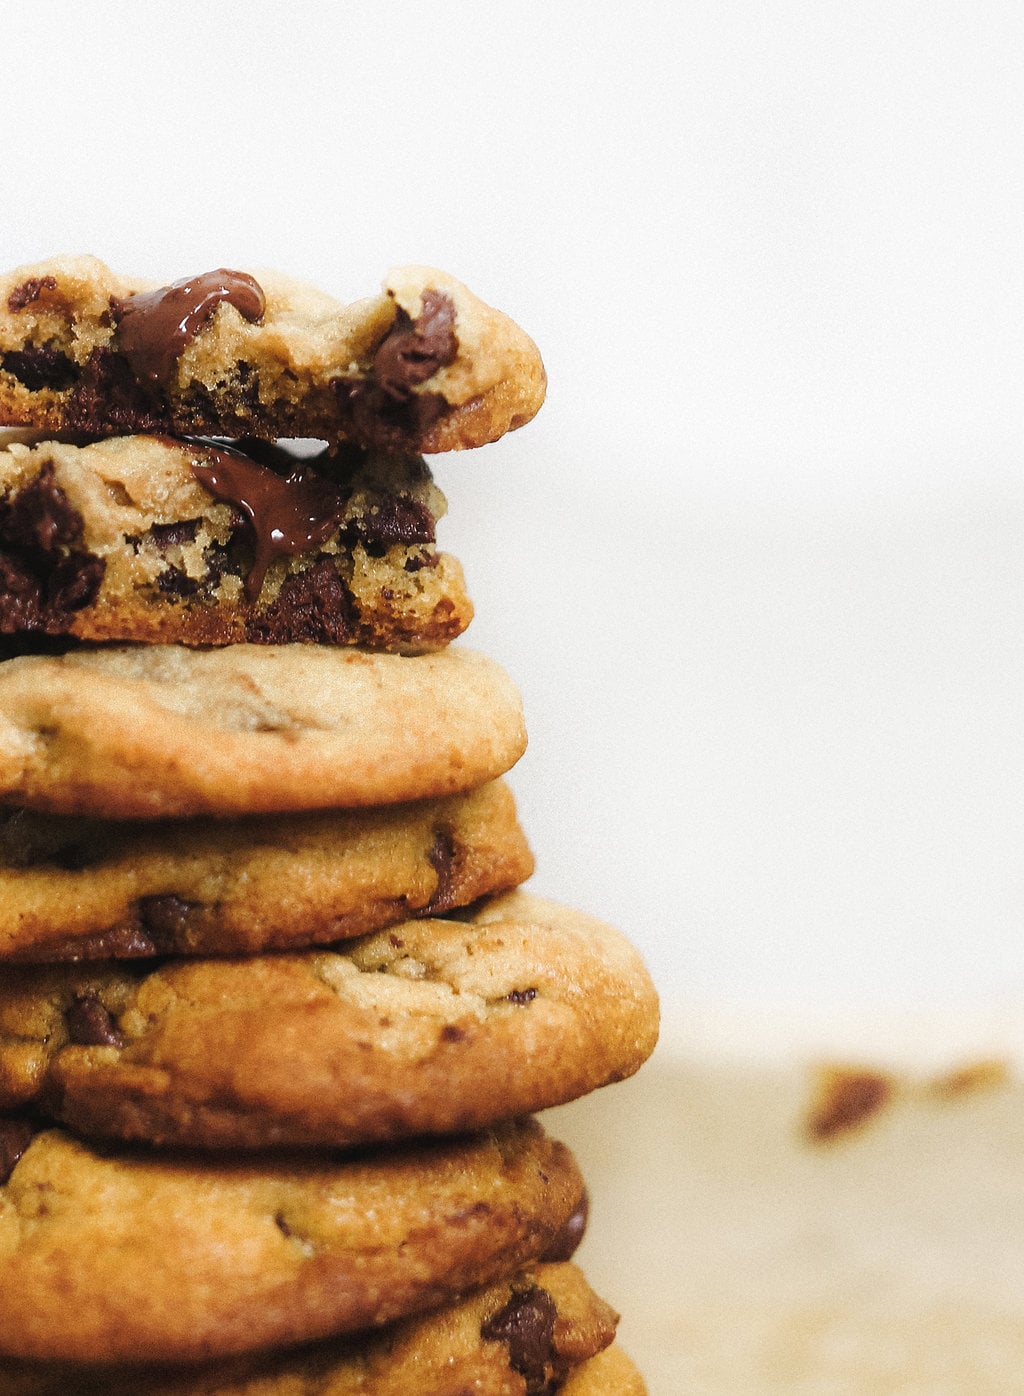 Coconut Oil Chocolate Chip Cookies are dairy-free with just a hint of coconut flavor but all of the taste and texture you love in a chocolate chip cookie. Our new go-to recipe!